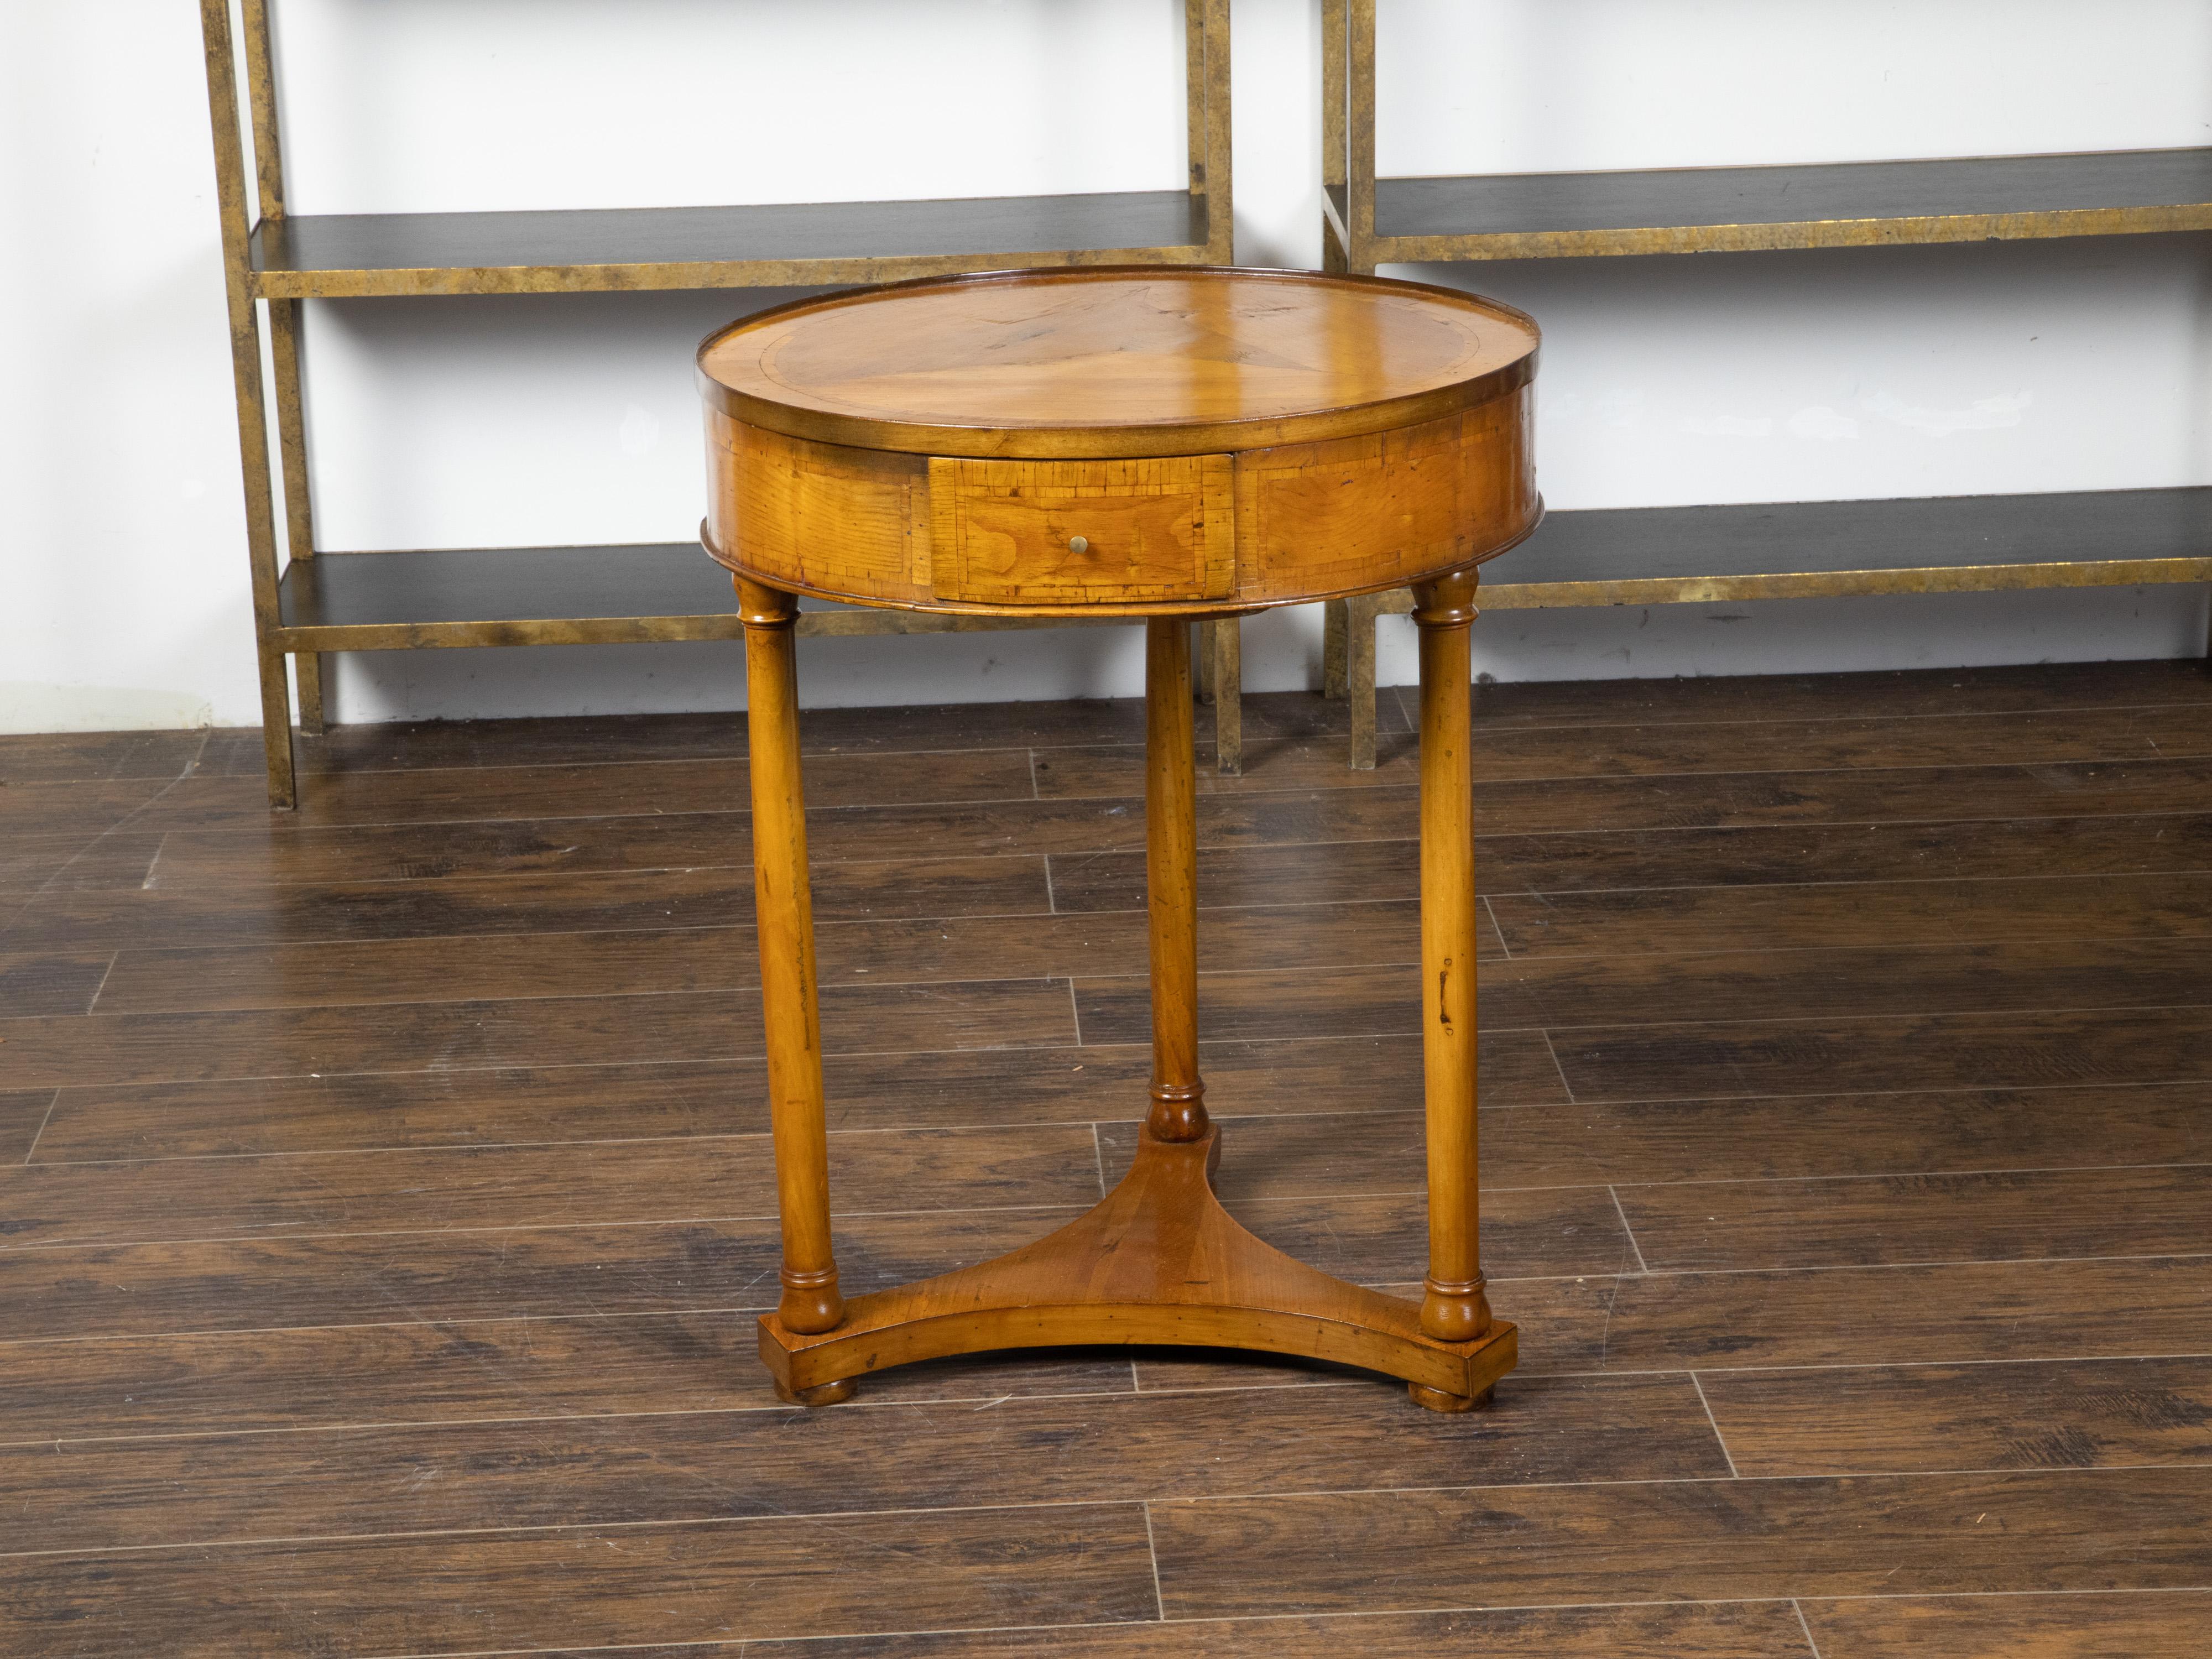 An Austrian Biedermeier period side table from the mid 19th century, with veneered top, banding, three drawers and column legs. Created during the Biedermeier period, this table features a circular veneered top sitting above an elegant apron